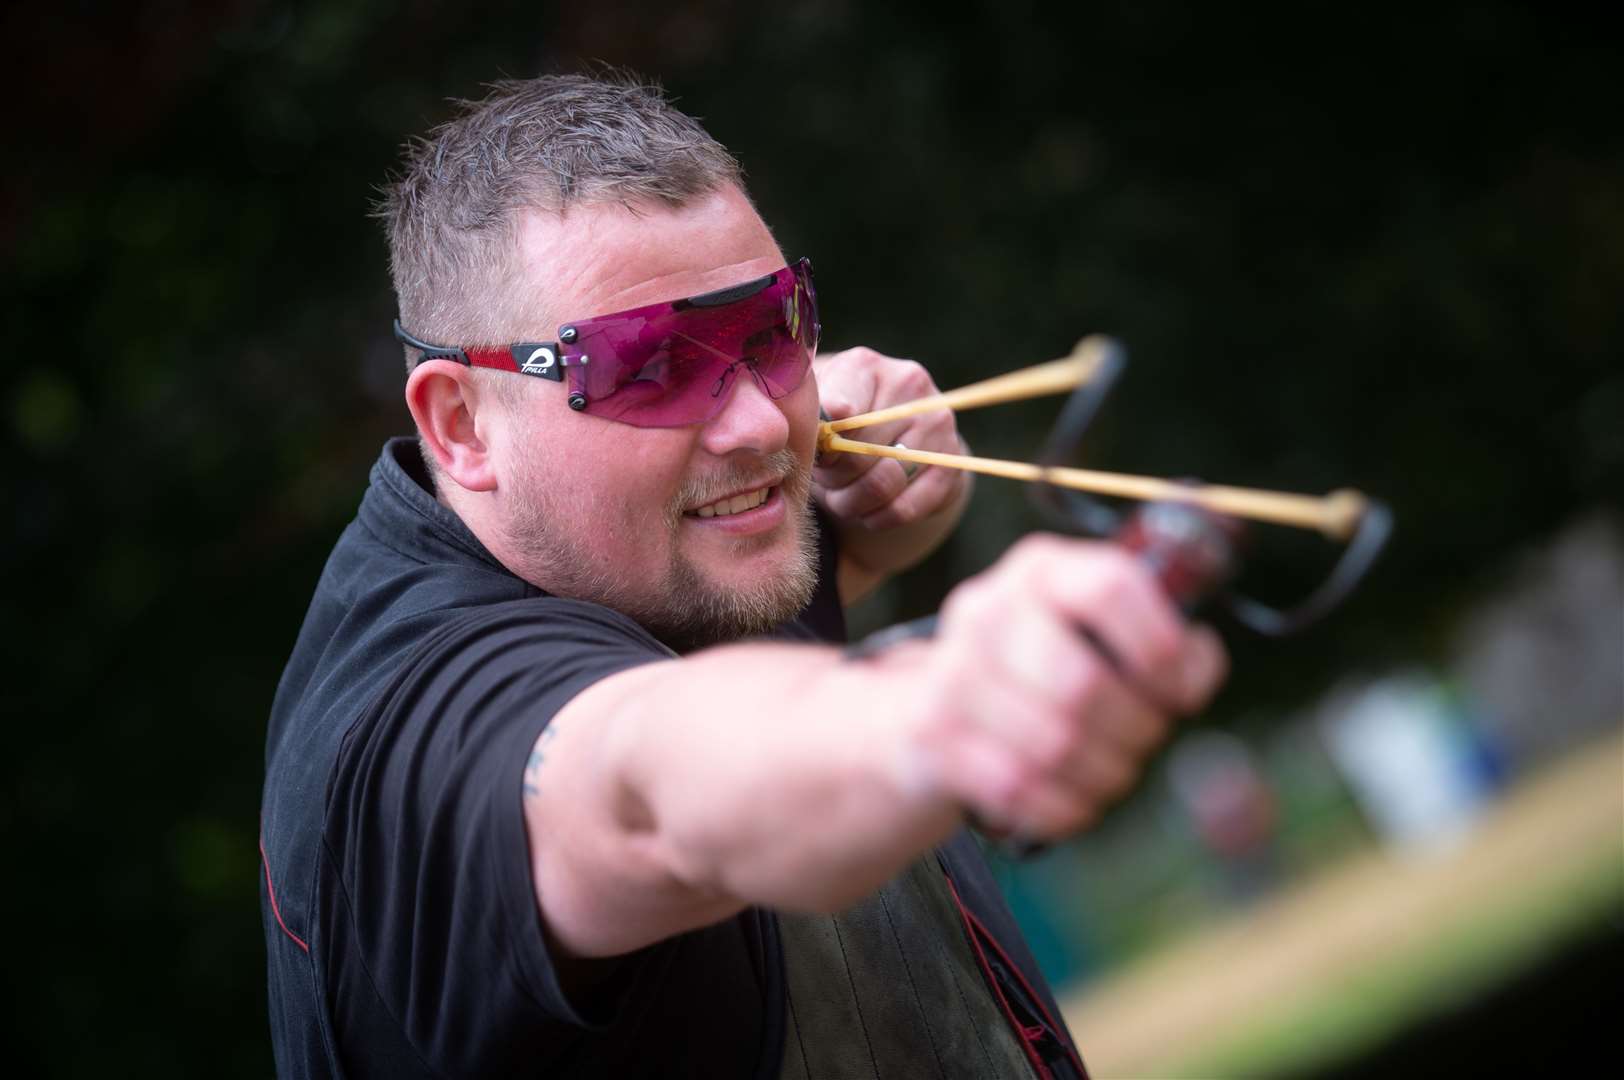 Taking aim with a sling shot at last year's Moy Country Fair.